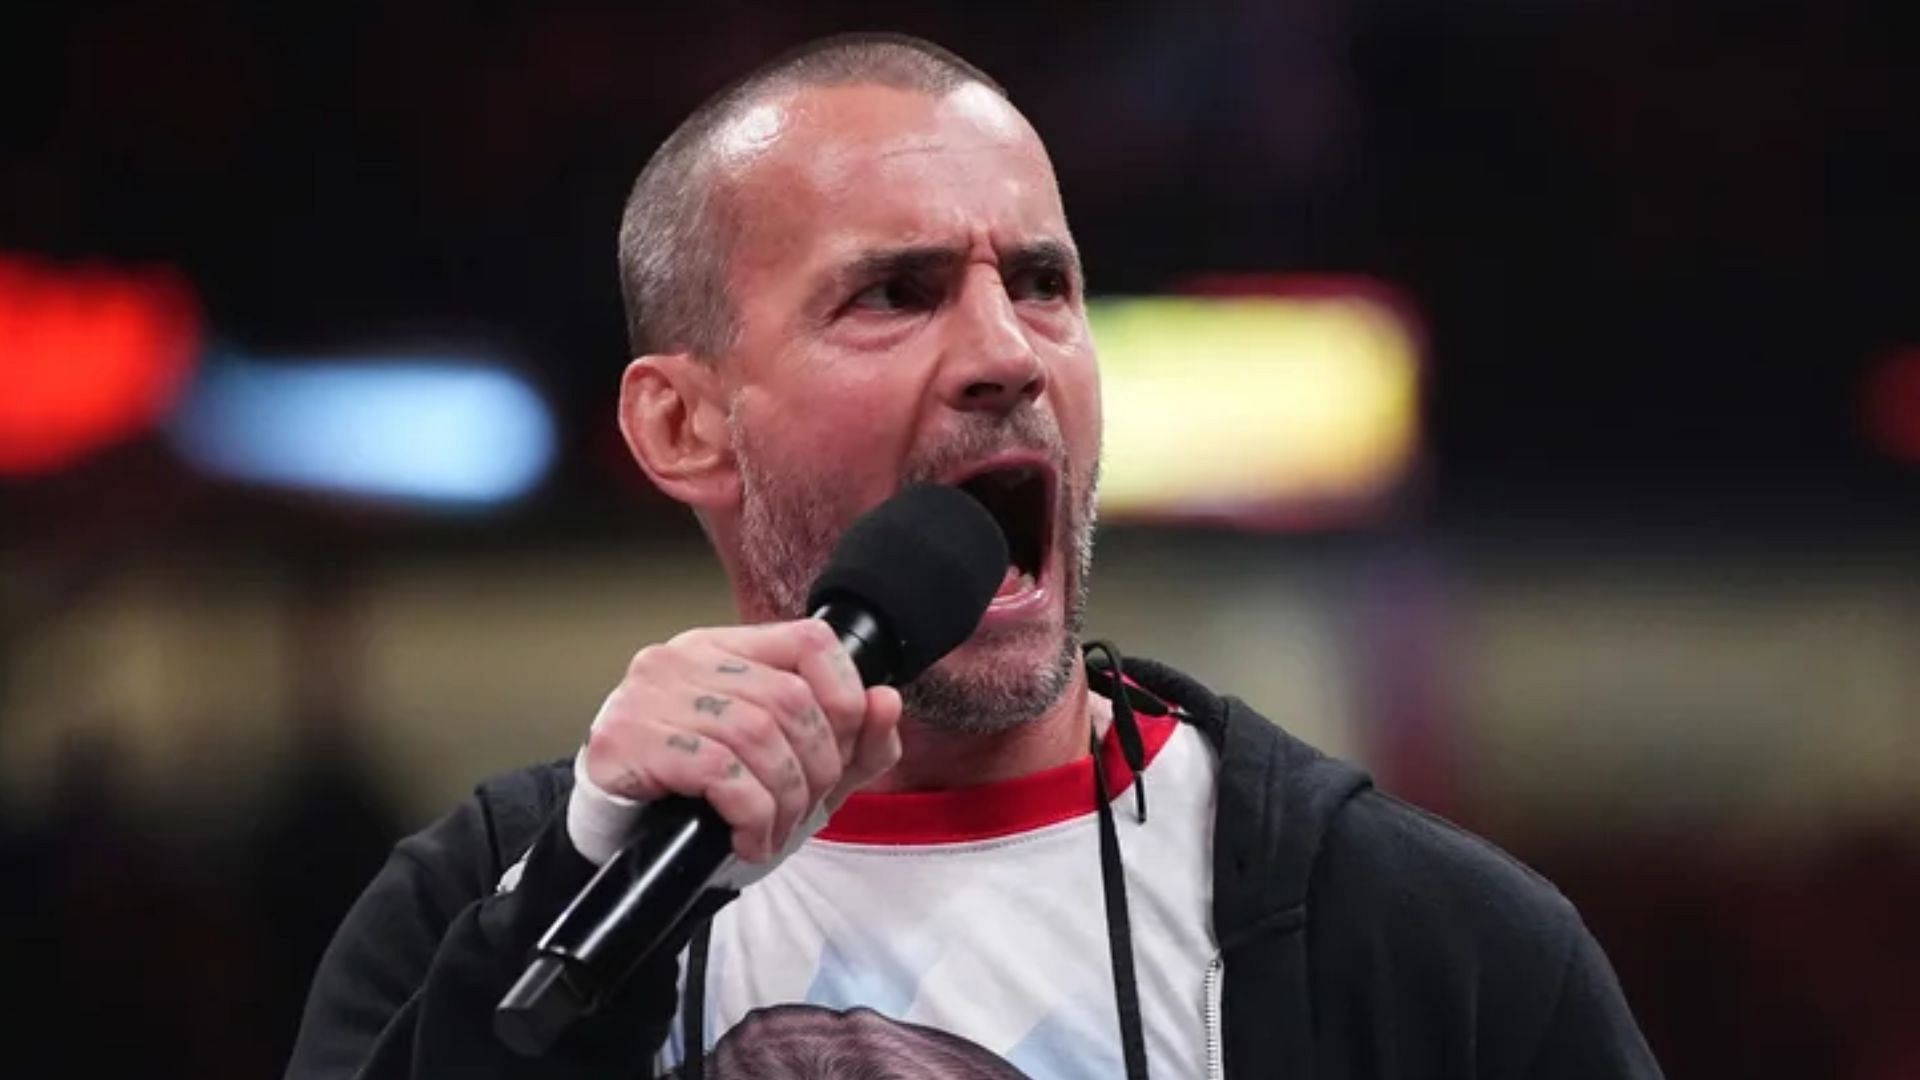 CM Punk was recently fired from AEW